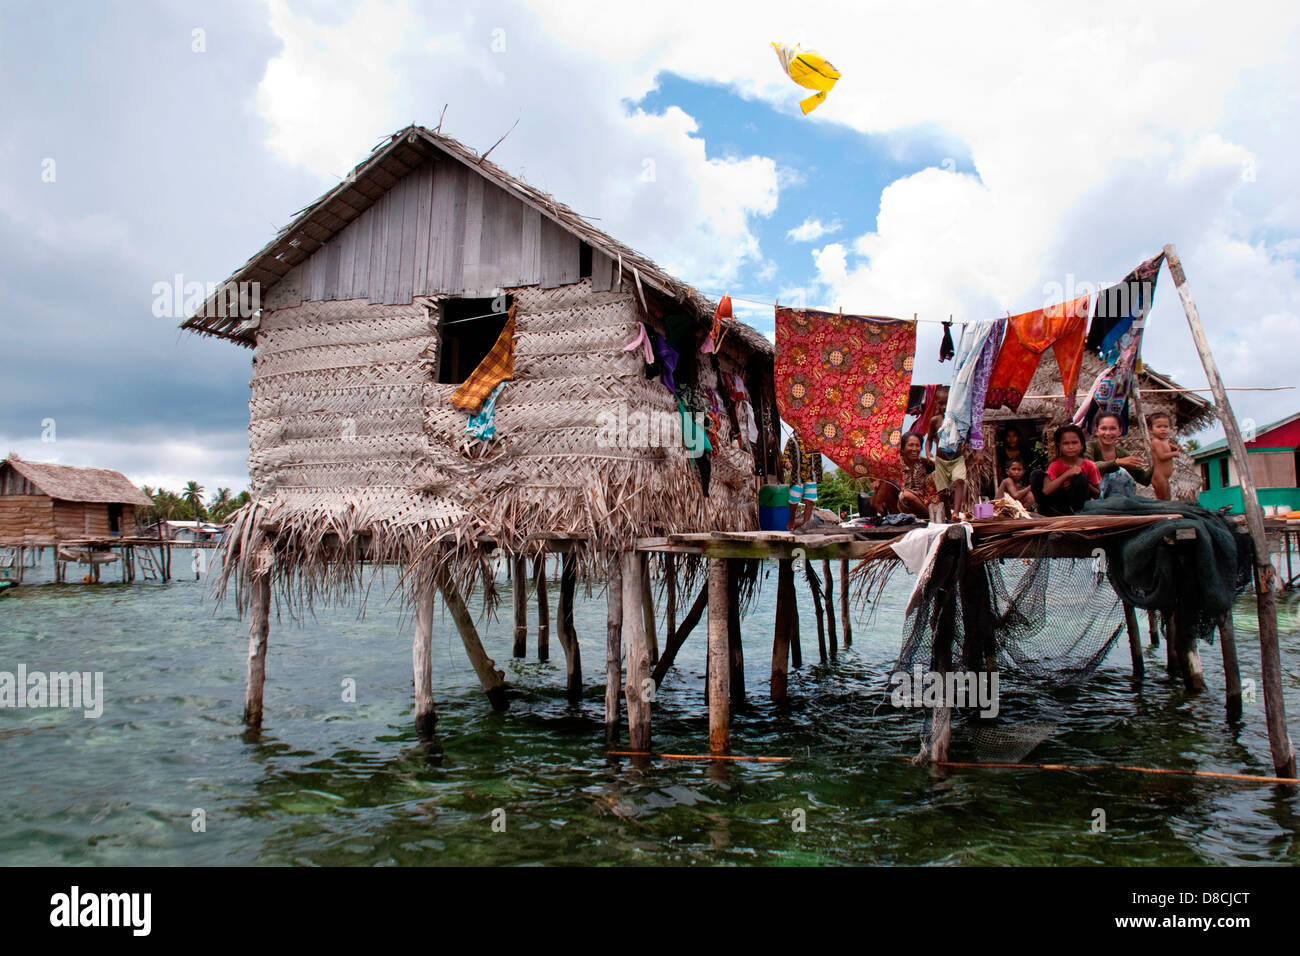 all the family members sitting in front of their floating hut in Semporna Sabah on Apr 22 2013 Stock Photo